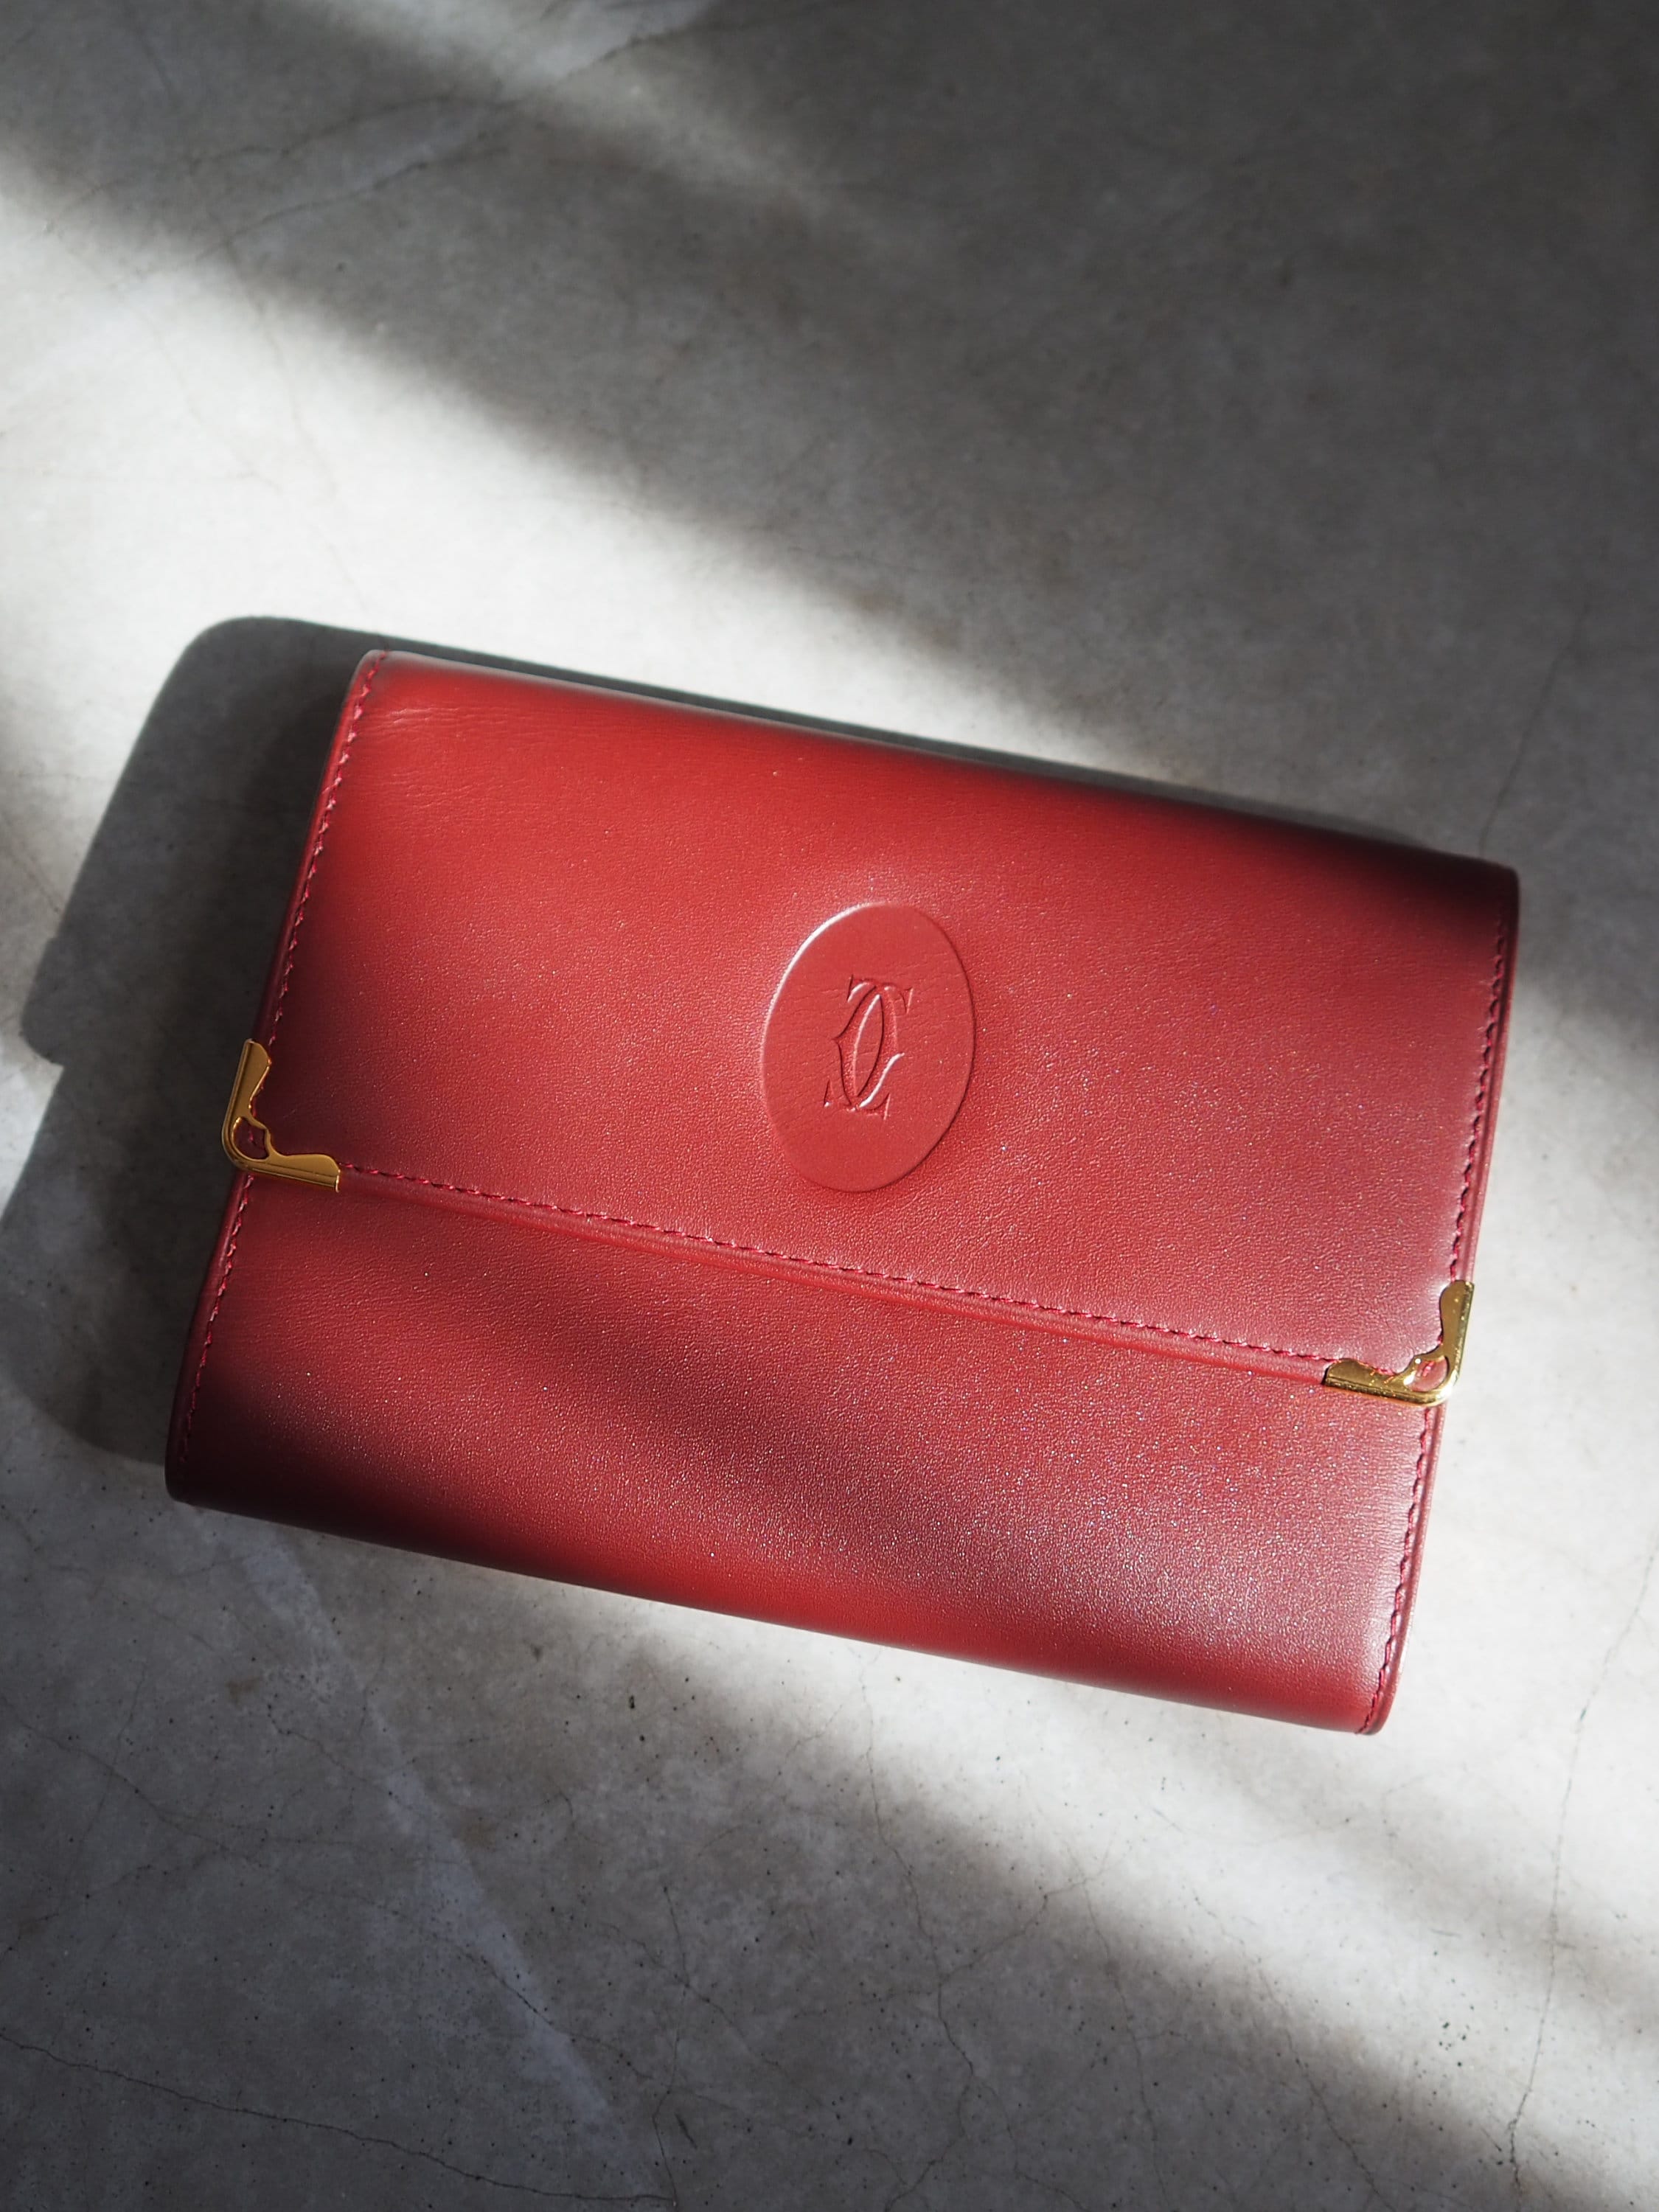 Cartier Wallet Red Leather MASTLINE Threefold Vintage Authentic